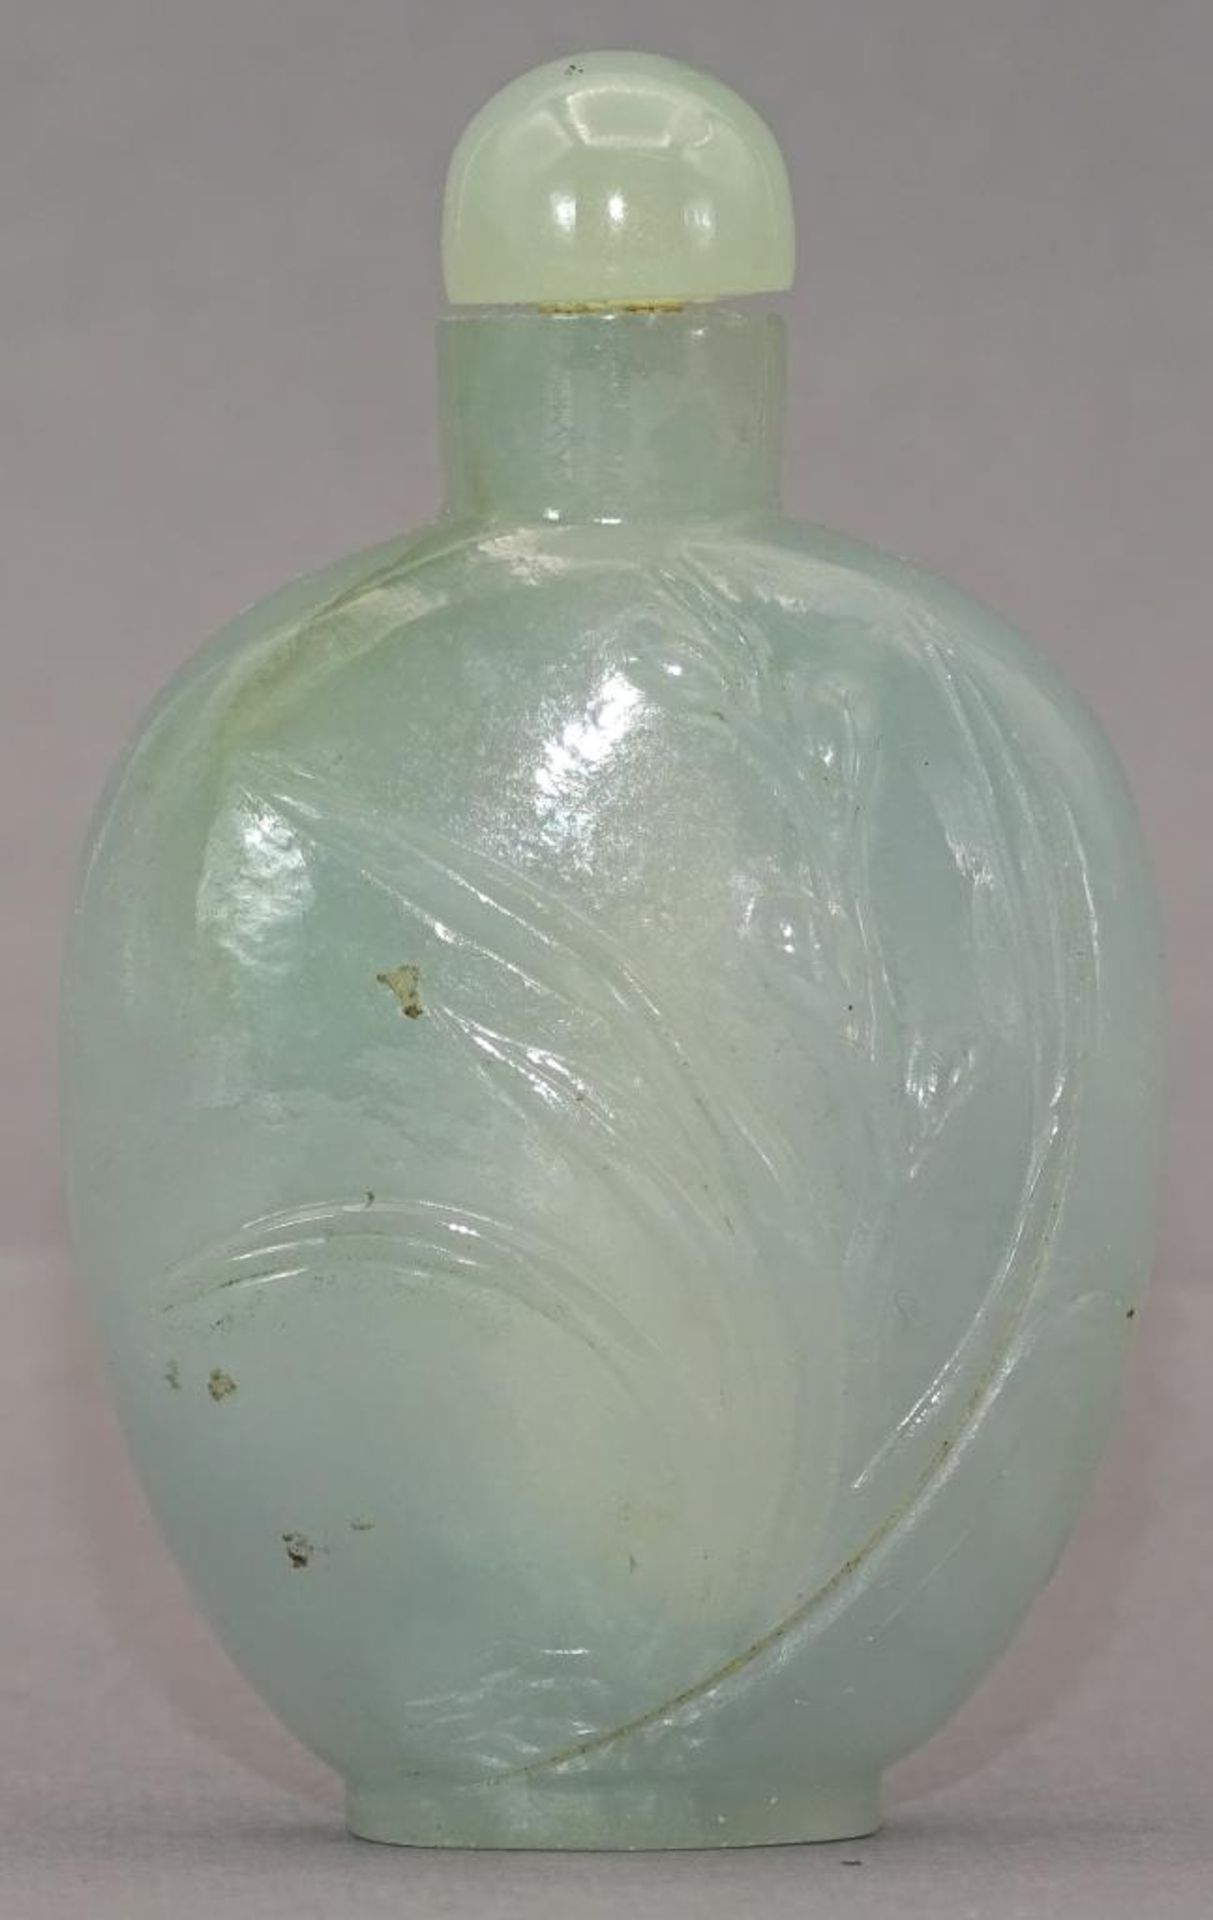 kl. Snuff Bottle,wohl Jade, China, h-6 cm, B-3,5 cm- - -22.61 % buyer's premium on the hammer - Image 4 of 8